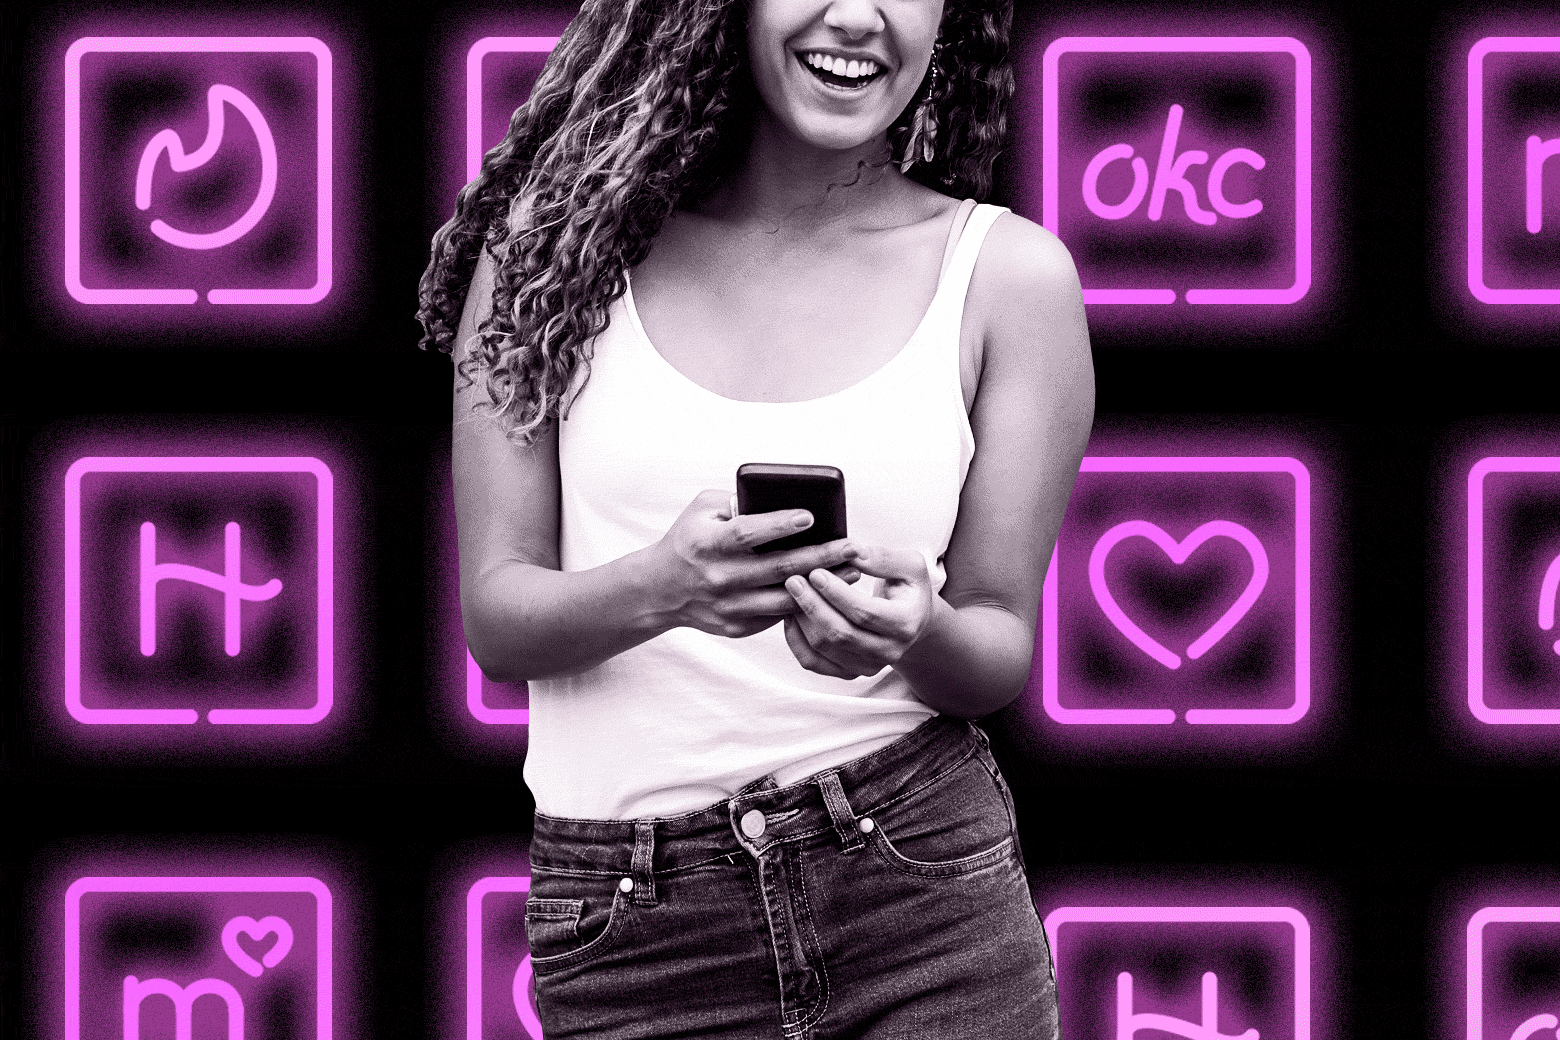 A woman smiling at her smartphones, with icons for various dating apps glowing in the background